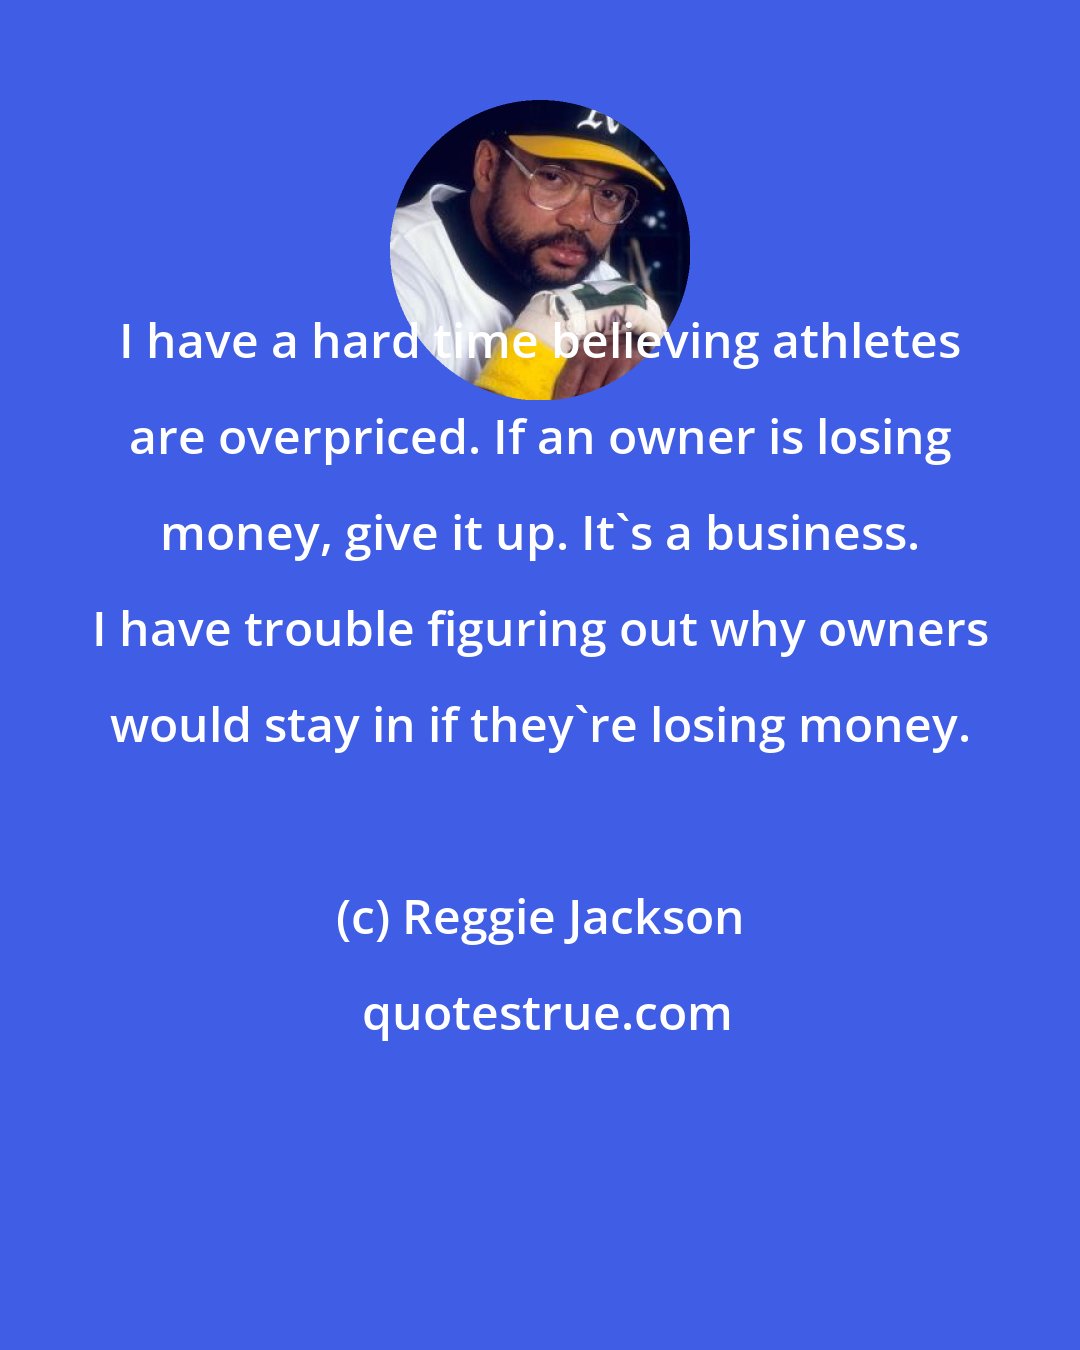 Reggie Jackson: I have a hard time believing athletes are overpriced. If an owner is losing money, give it up. It's a business. I have trouble figuring out why owners would stay in if they're losing money.